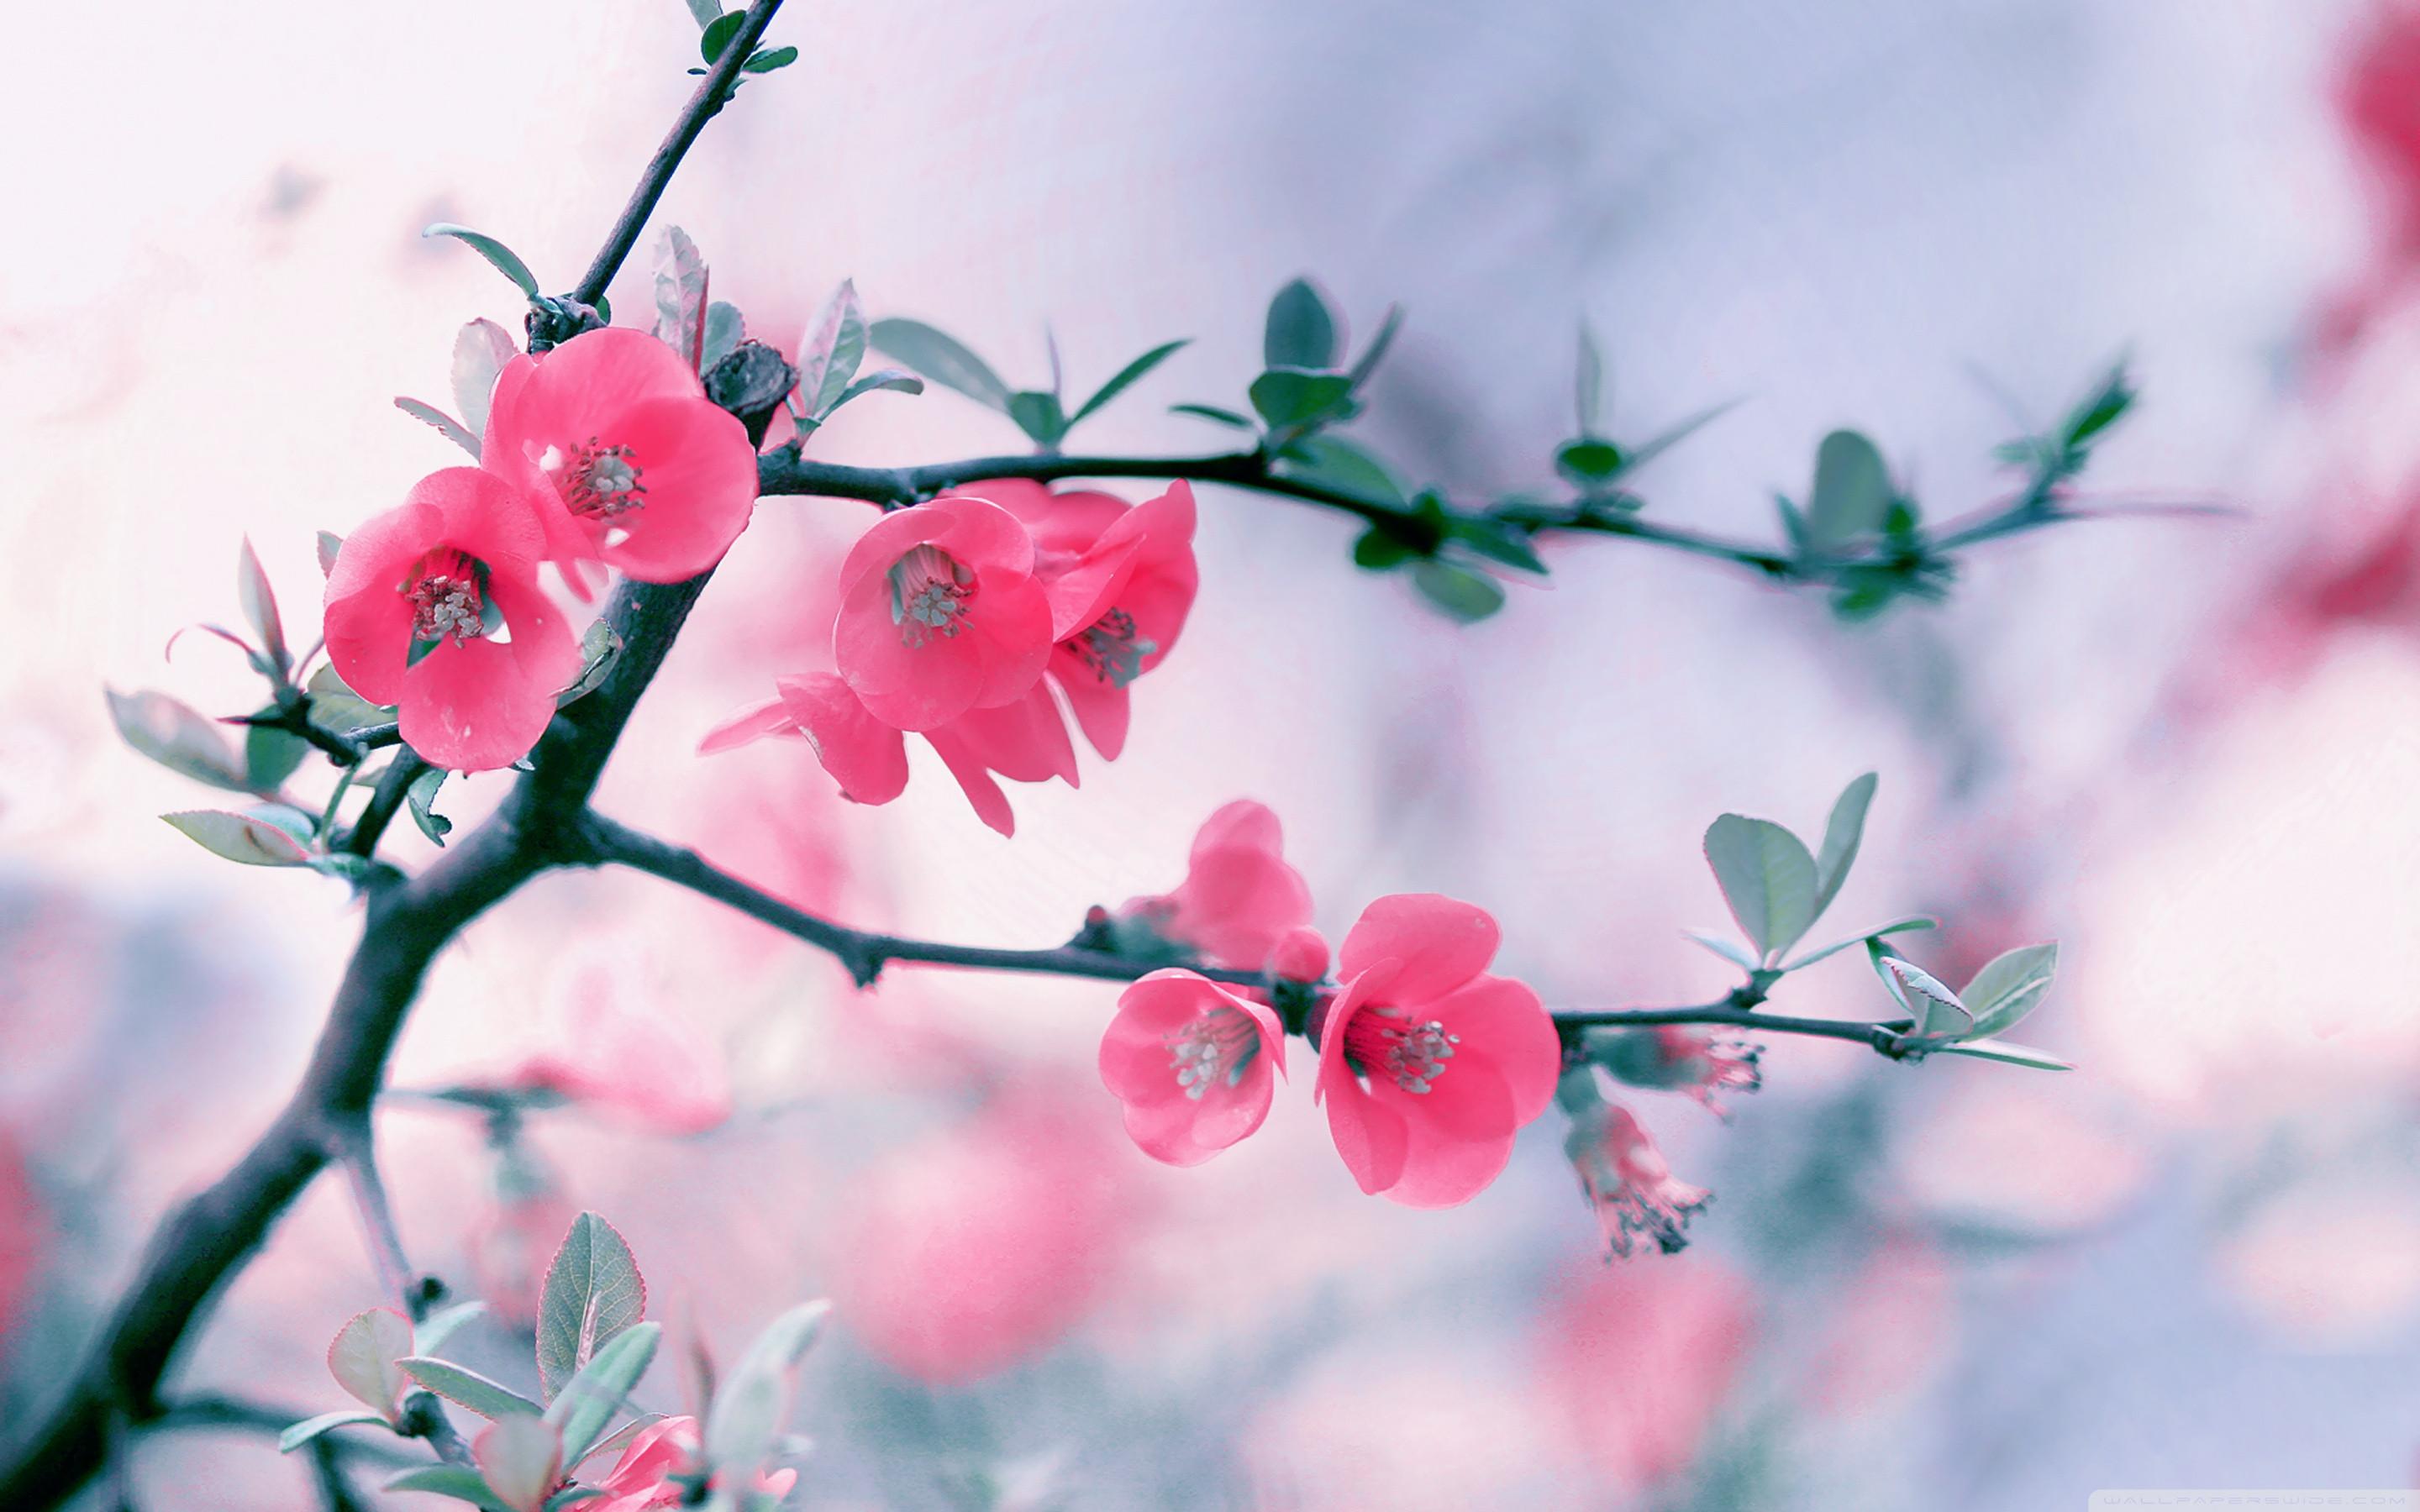 4 Flower wallpapers that perfect for Spring | Iphone wallpapers | fab mood